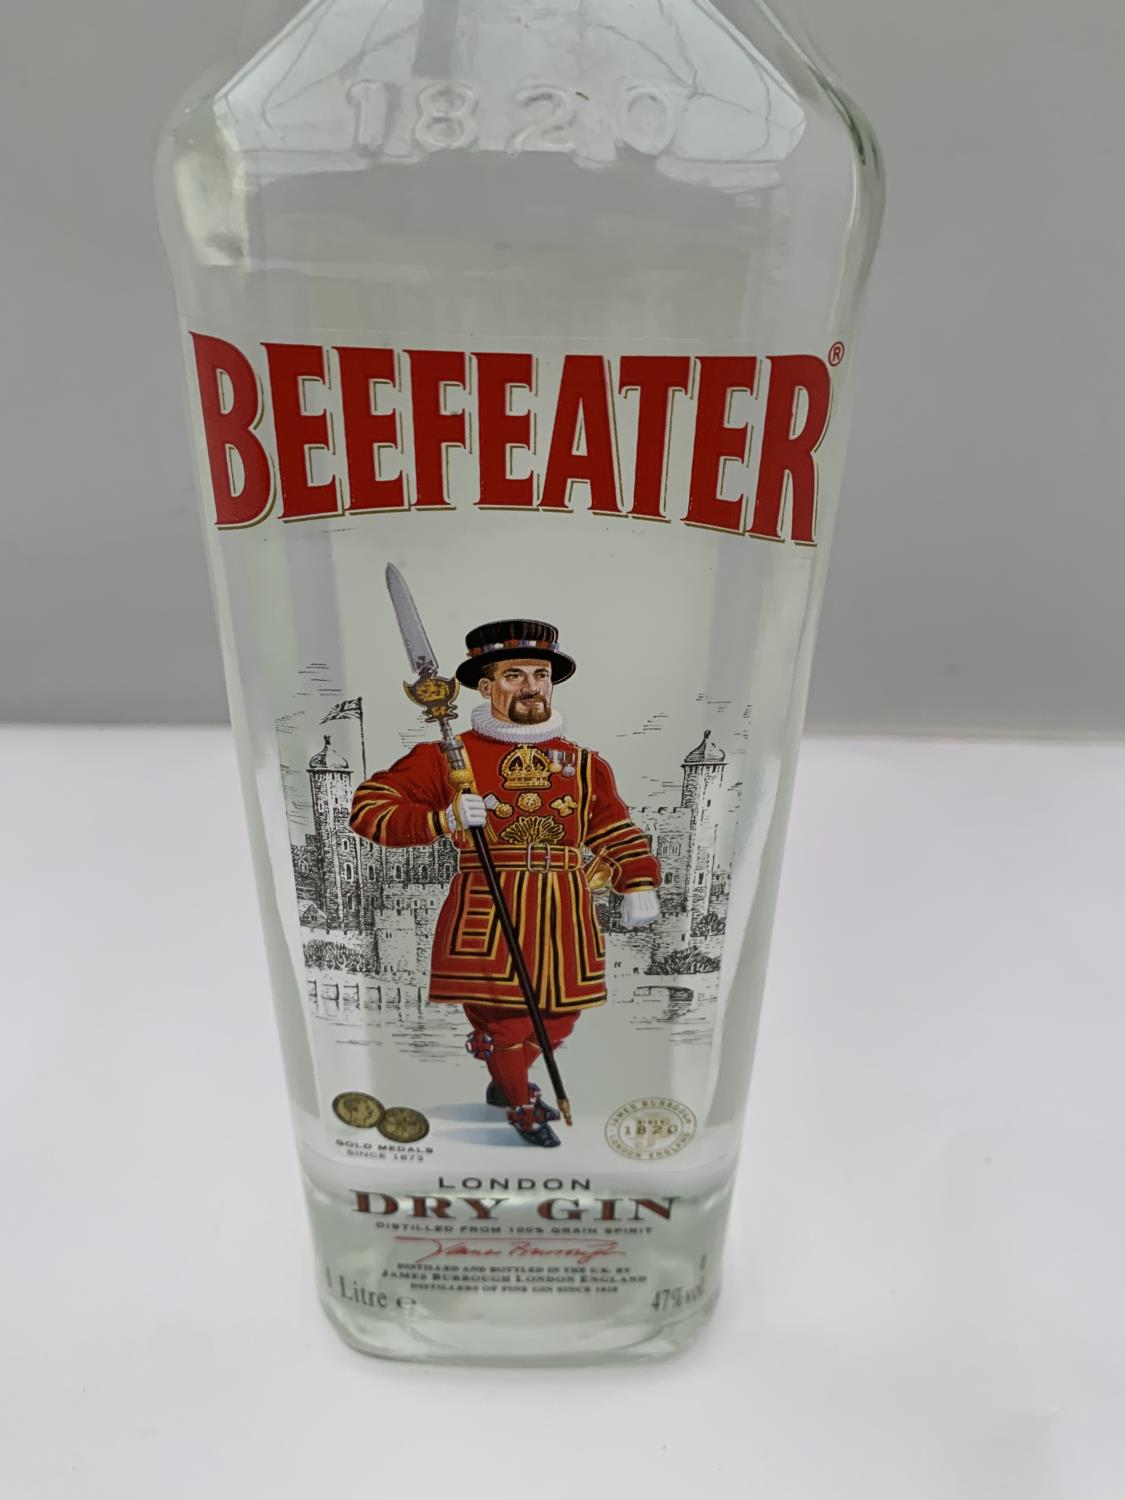 A 1 LITRE BEEFEATER LONDON DRY GIN 47% VOL - Image 2 of 3